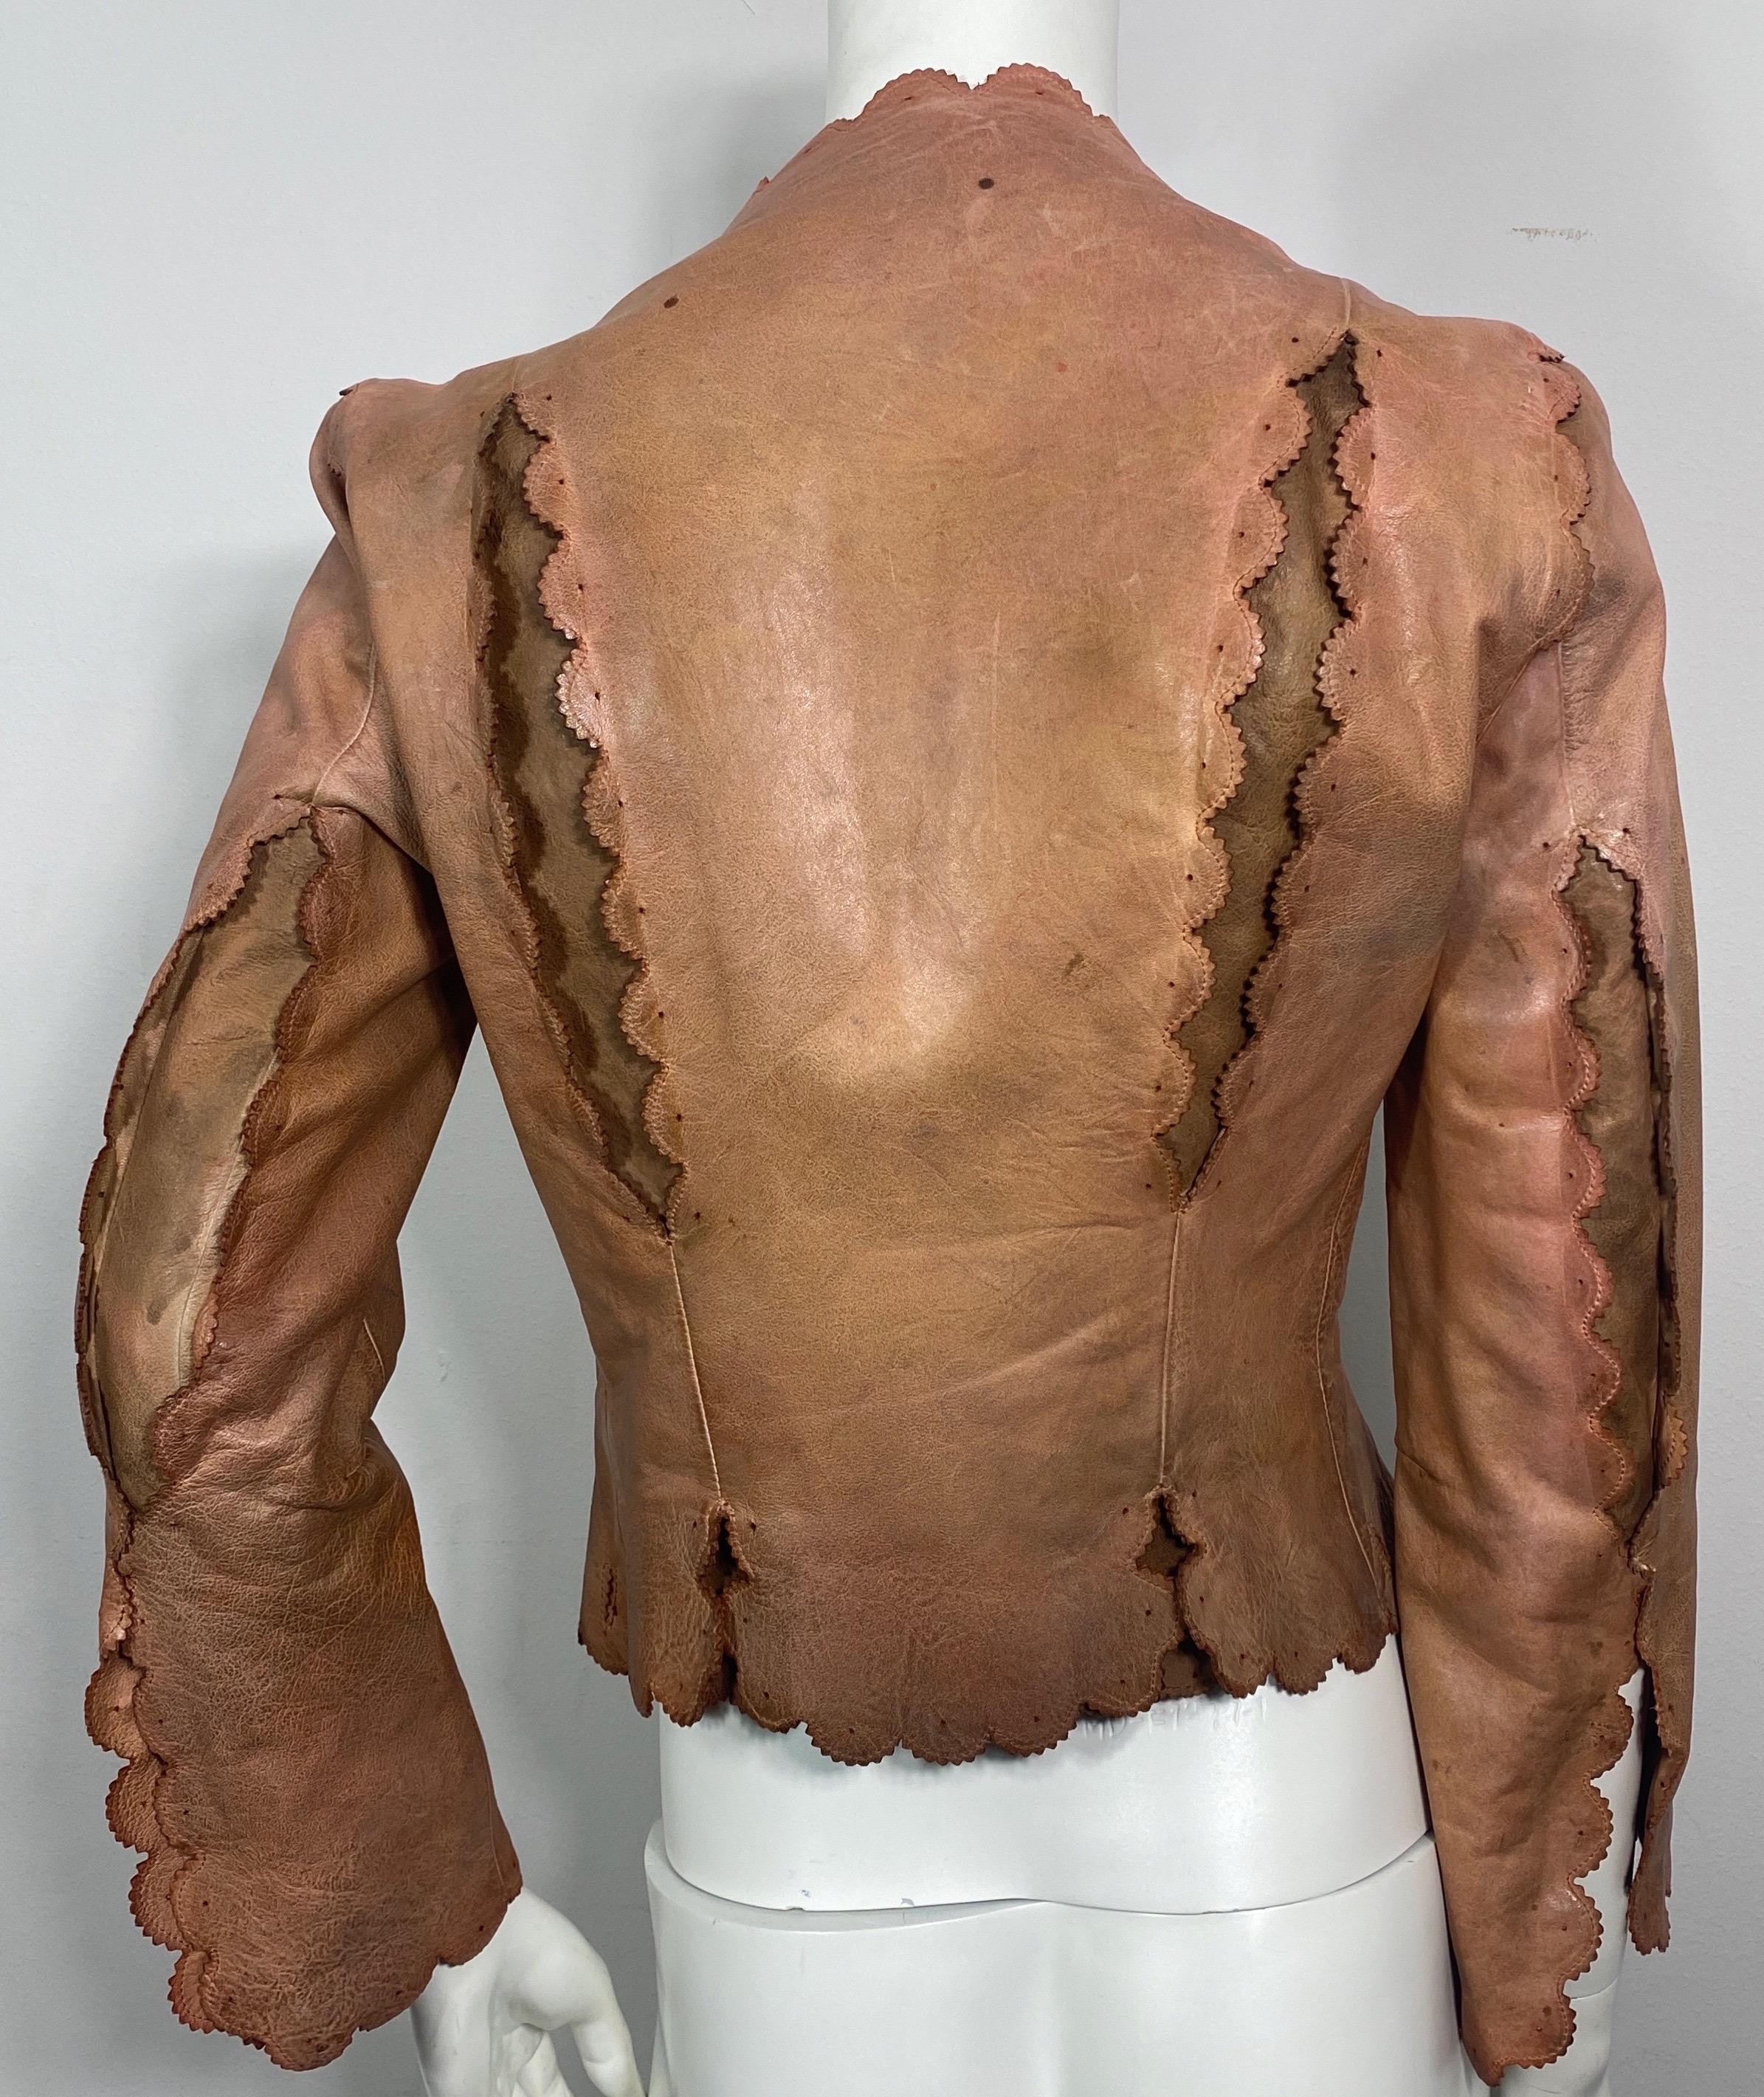 Alexander McQueen Dark Nude Distressed Leather Jacket-Size 40 For Sale 5